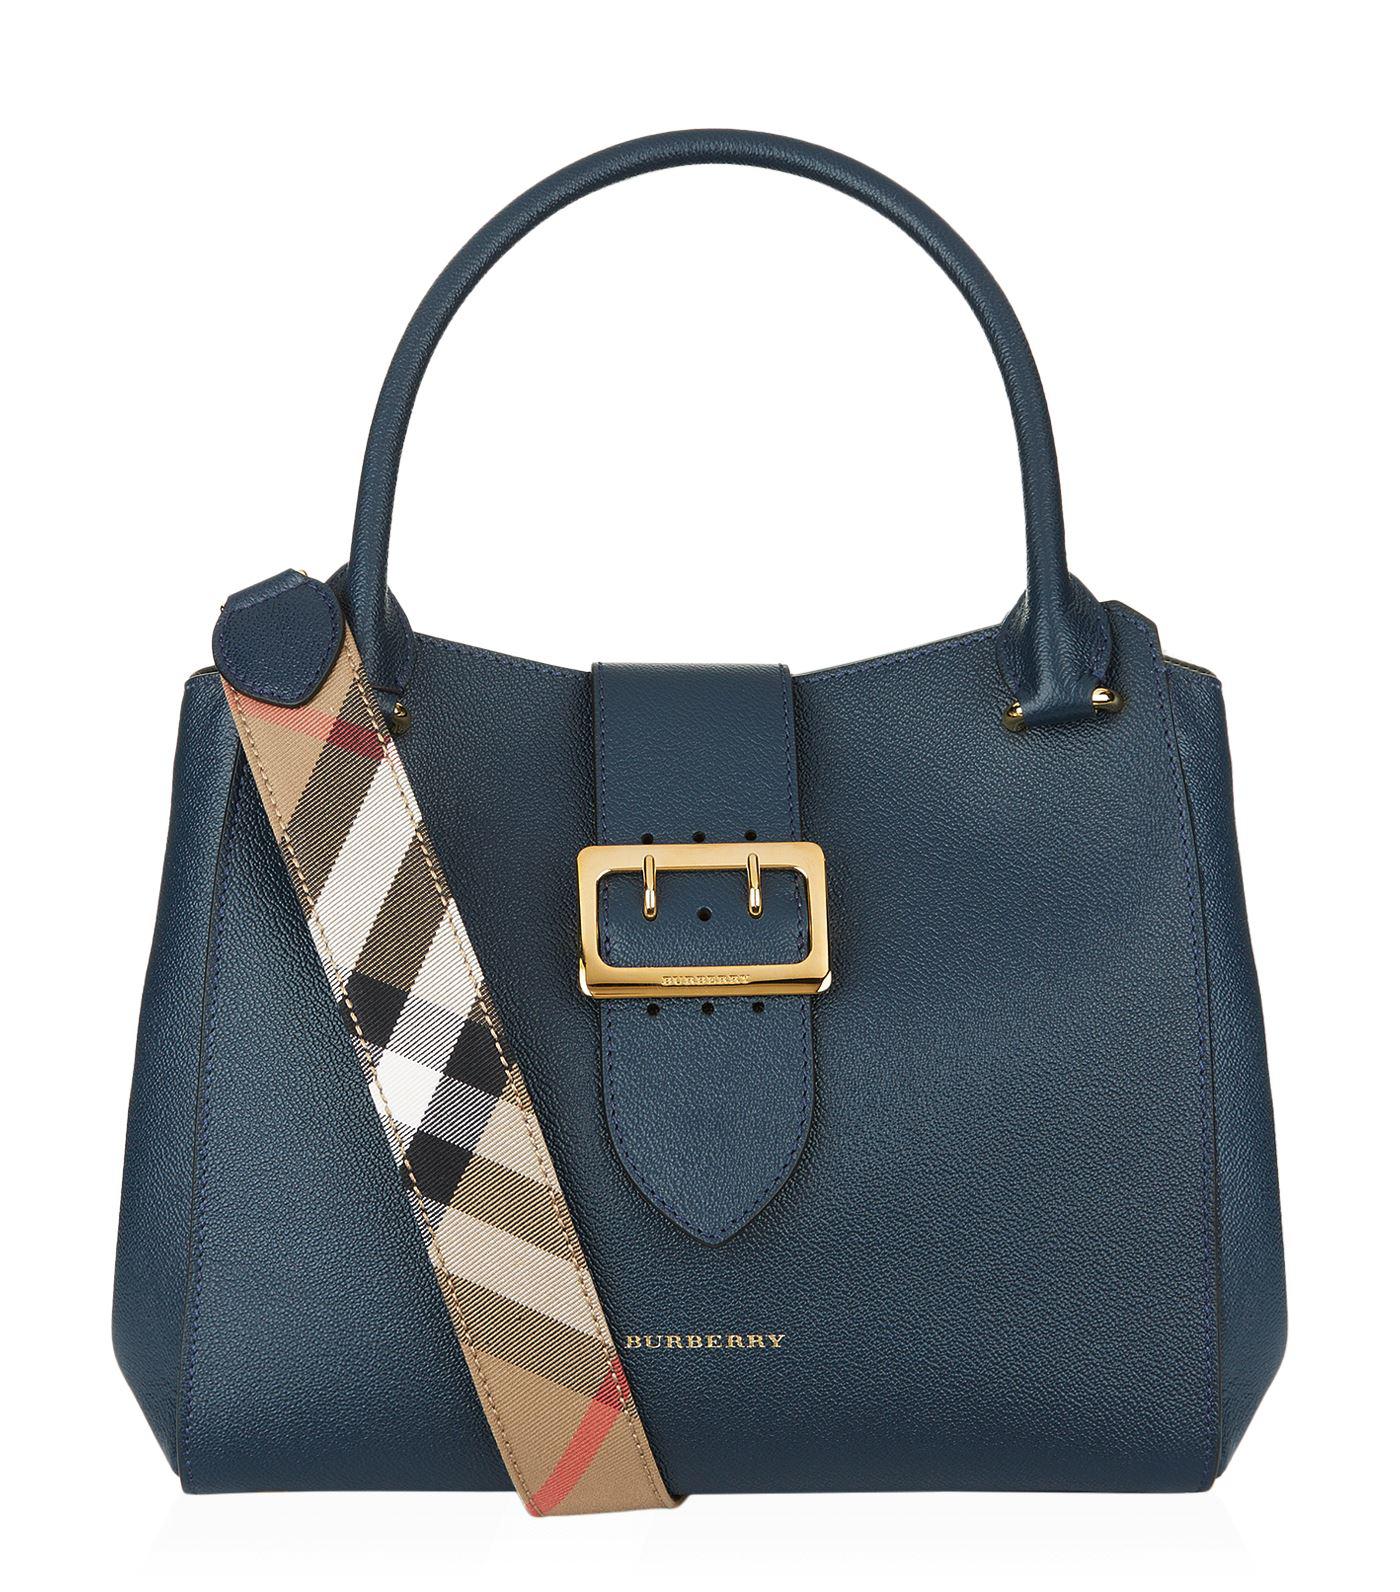 Lyst - Burberry Buckle Tote Bag in Blue